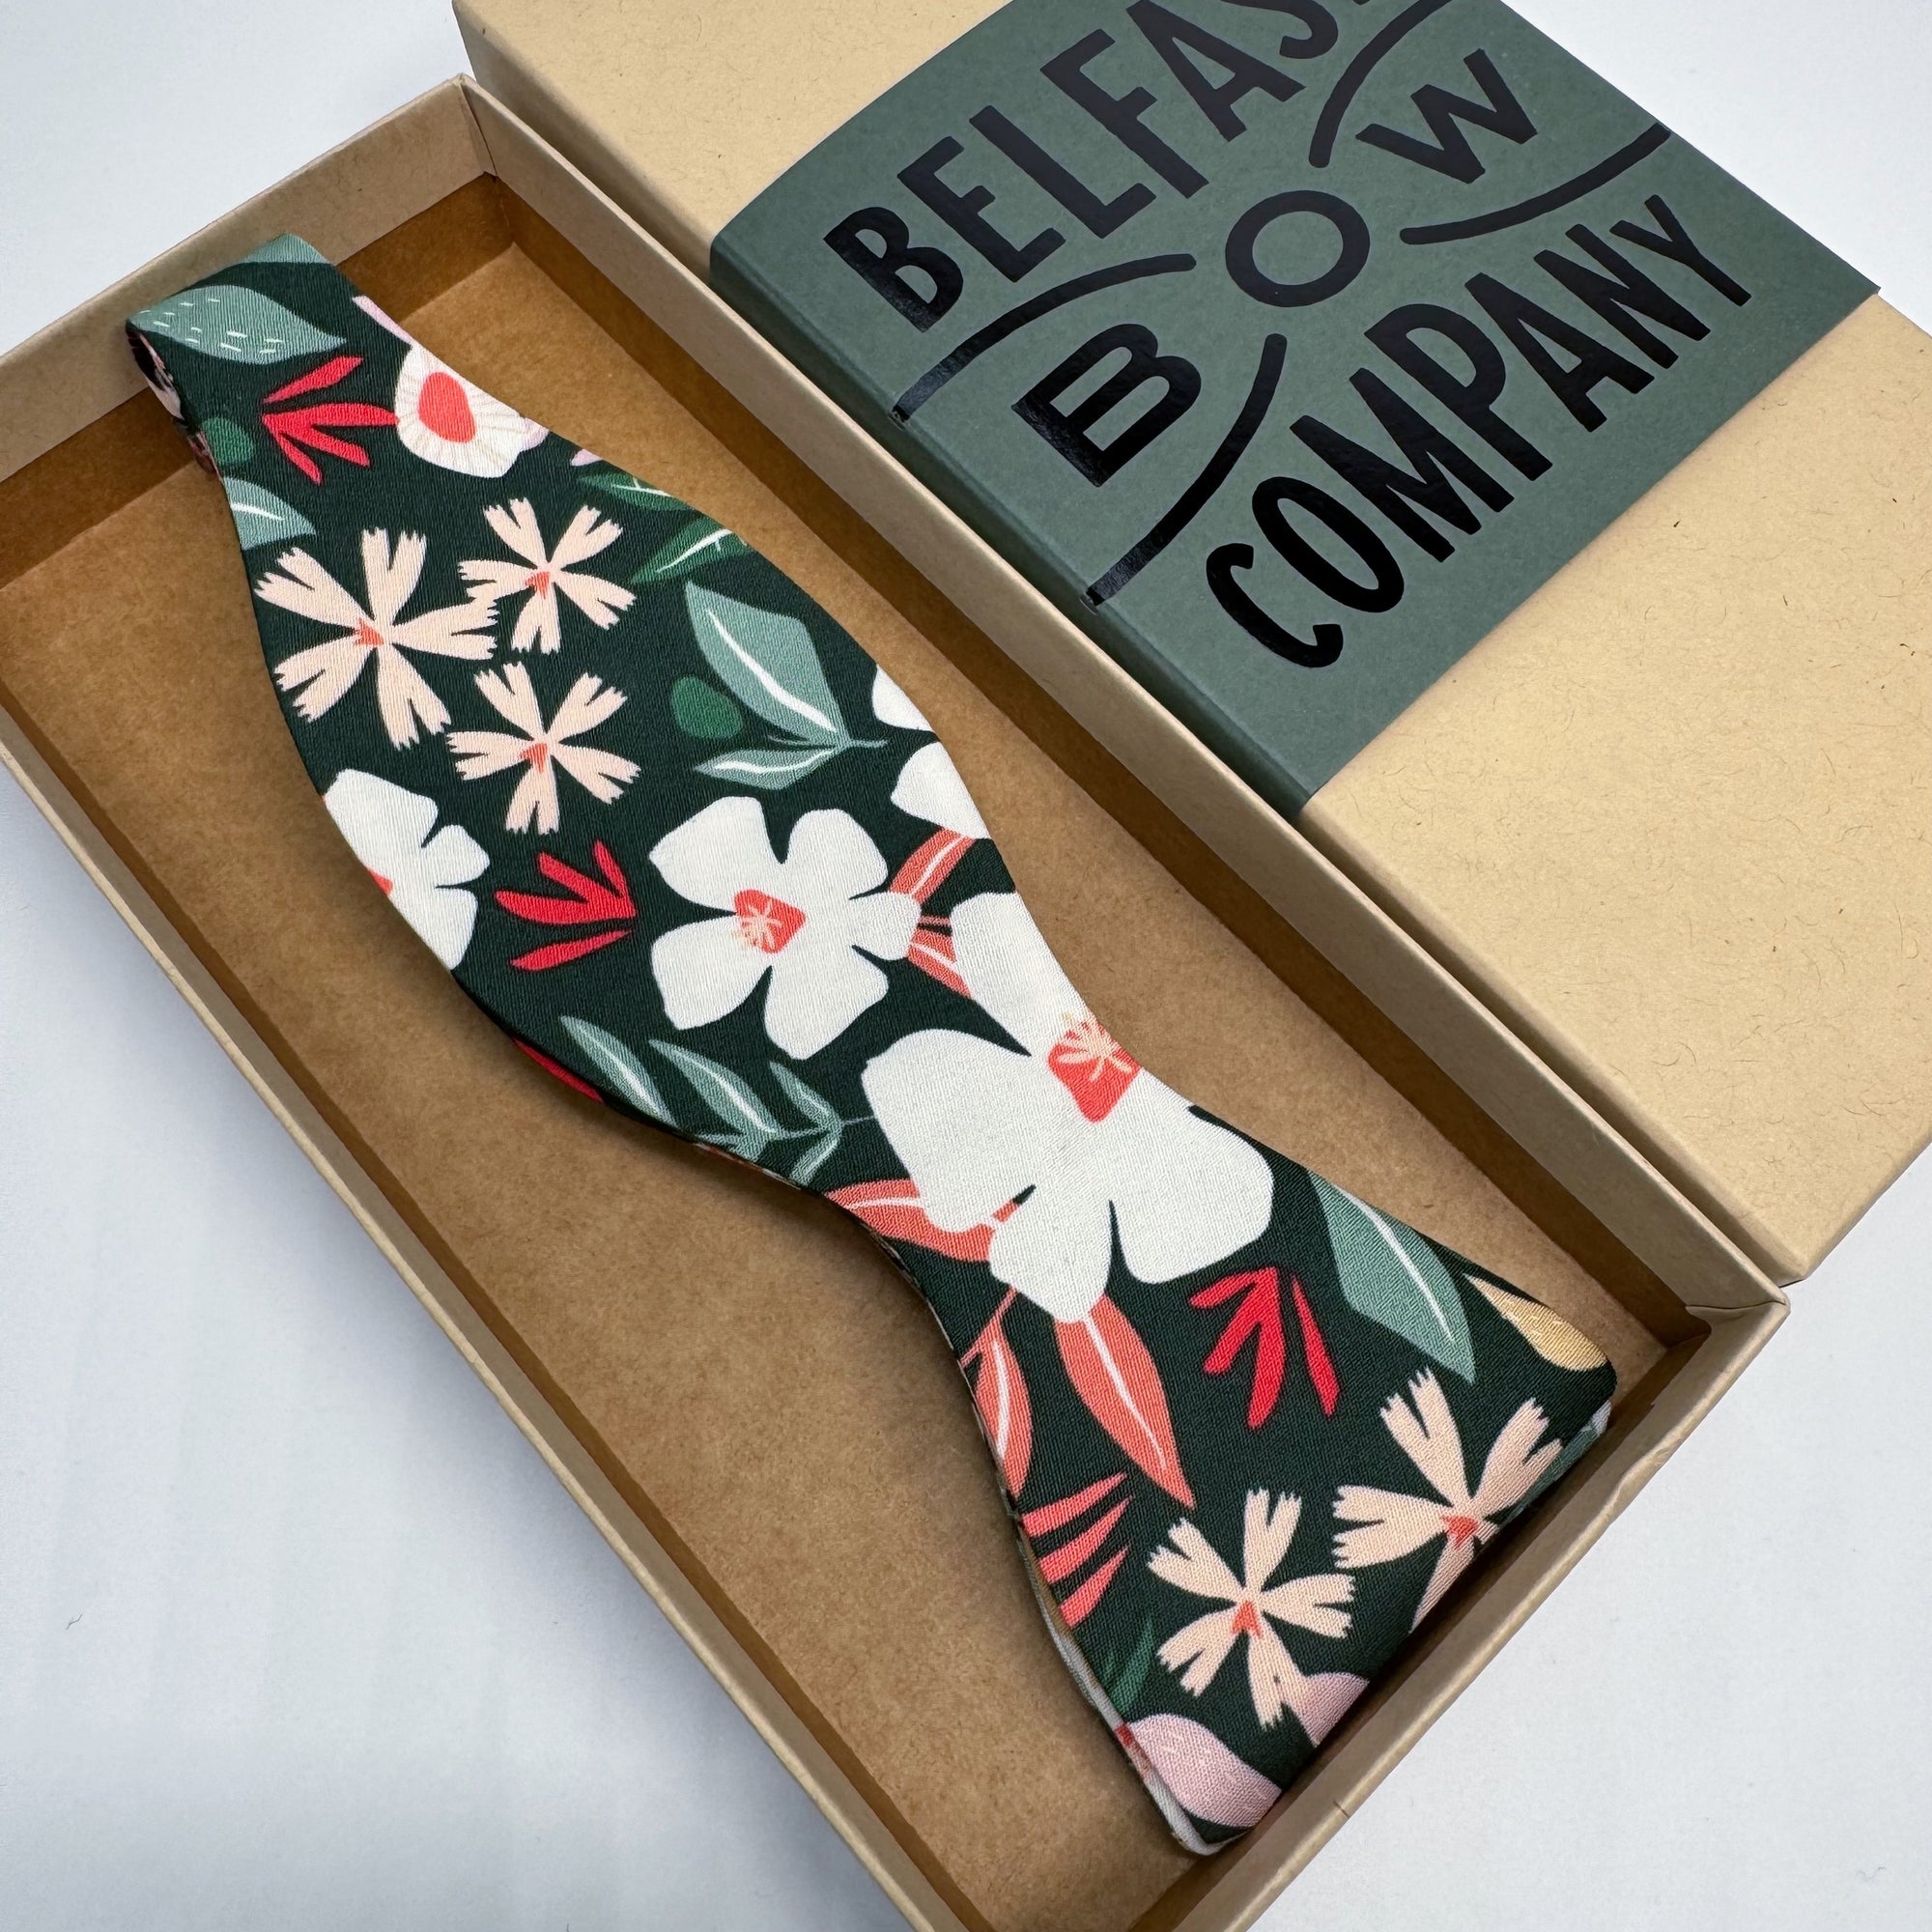 boho blooms self-tie bow tie in tropical green floral by the belfast bow company